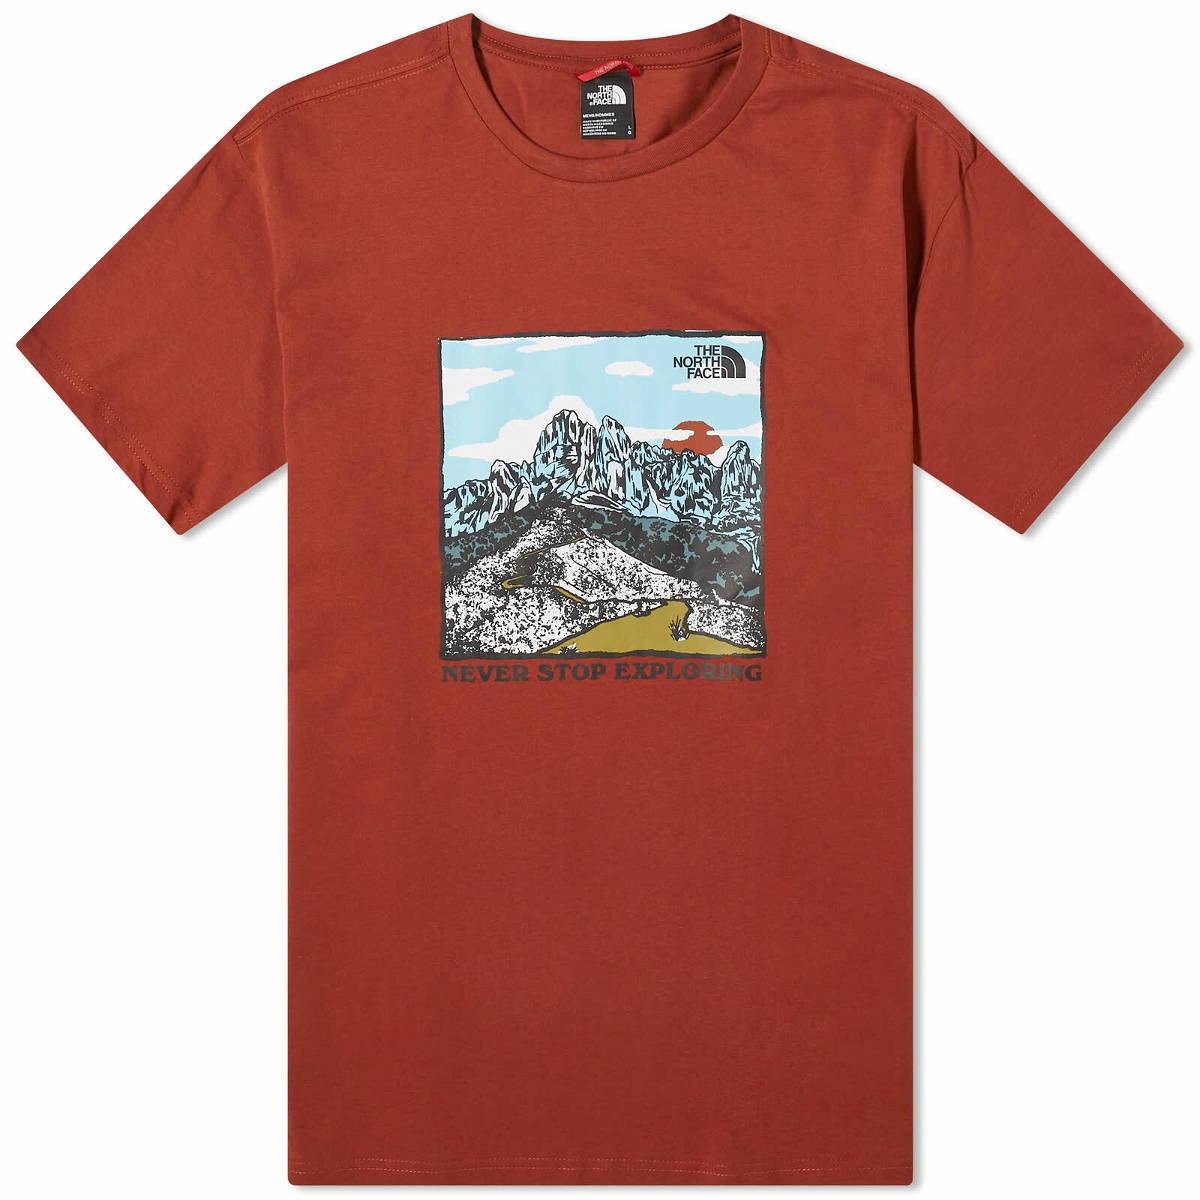 Photo: The North Face Men's Graphic T-Shirt in Brandy Brown